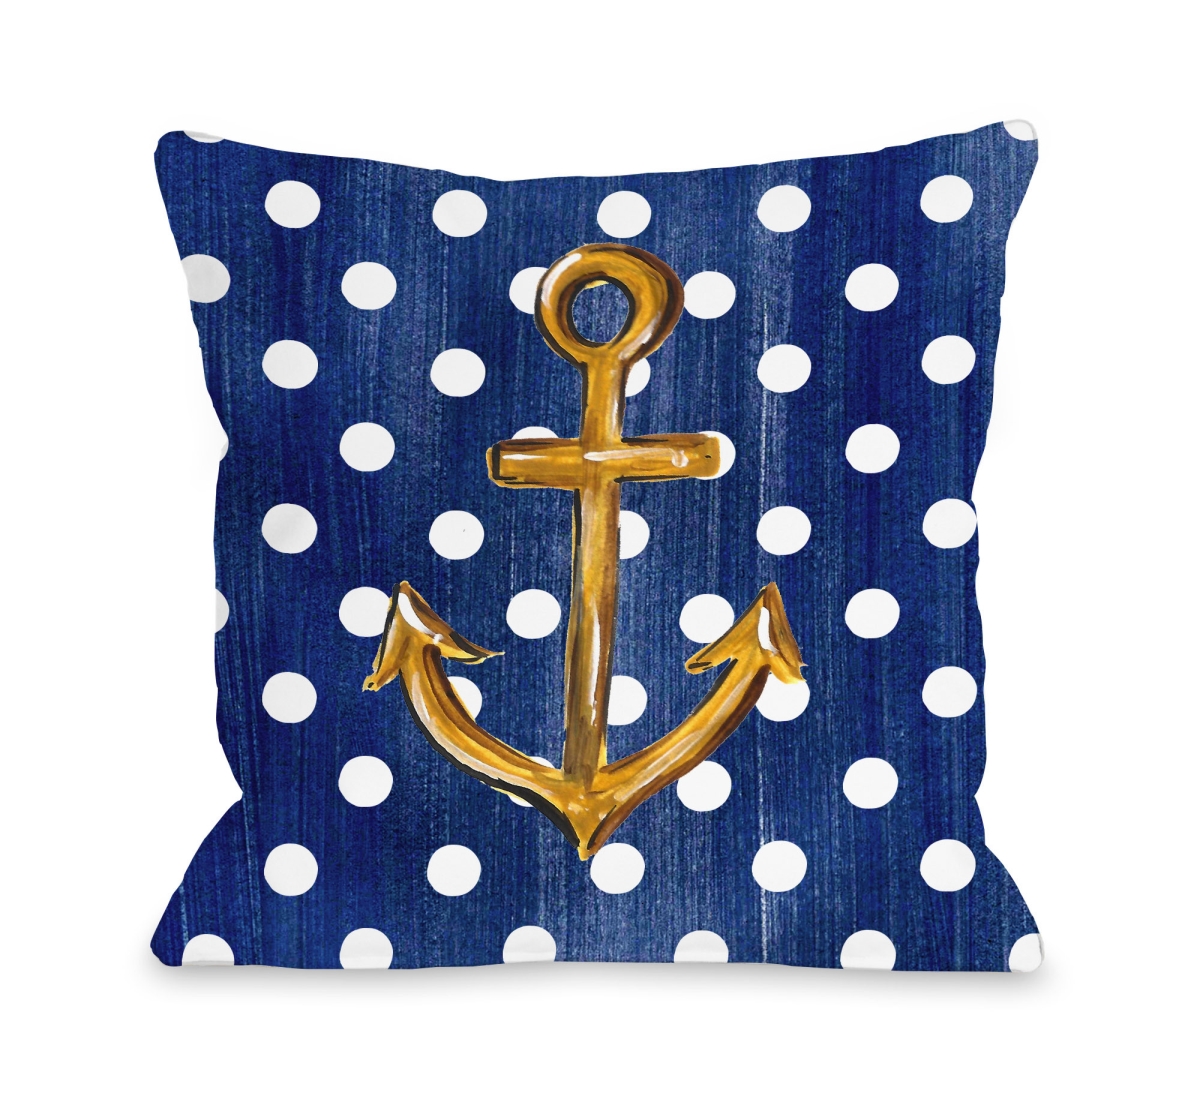 16 X 16 In. Gold Anchor Dots Pillow By Timree, Multicolor